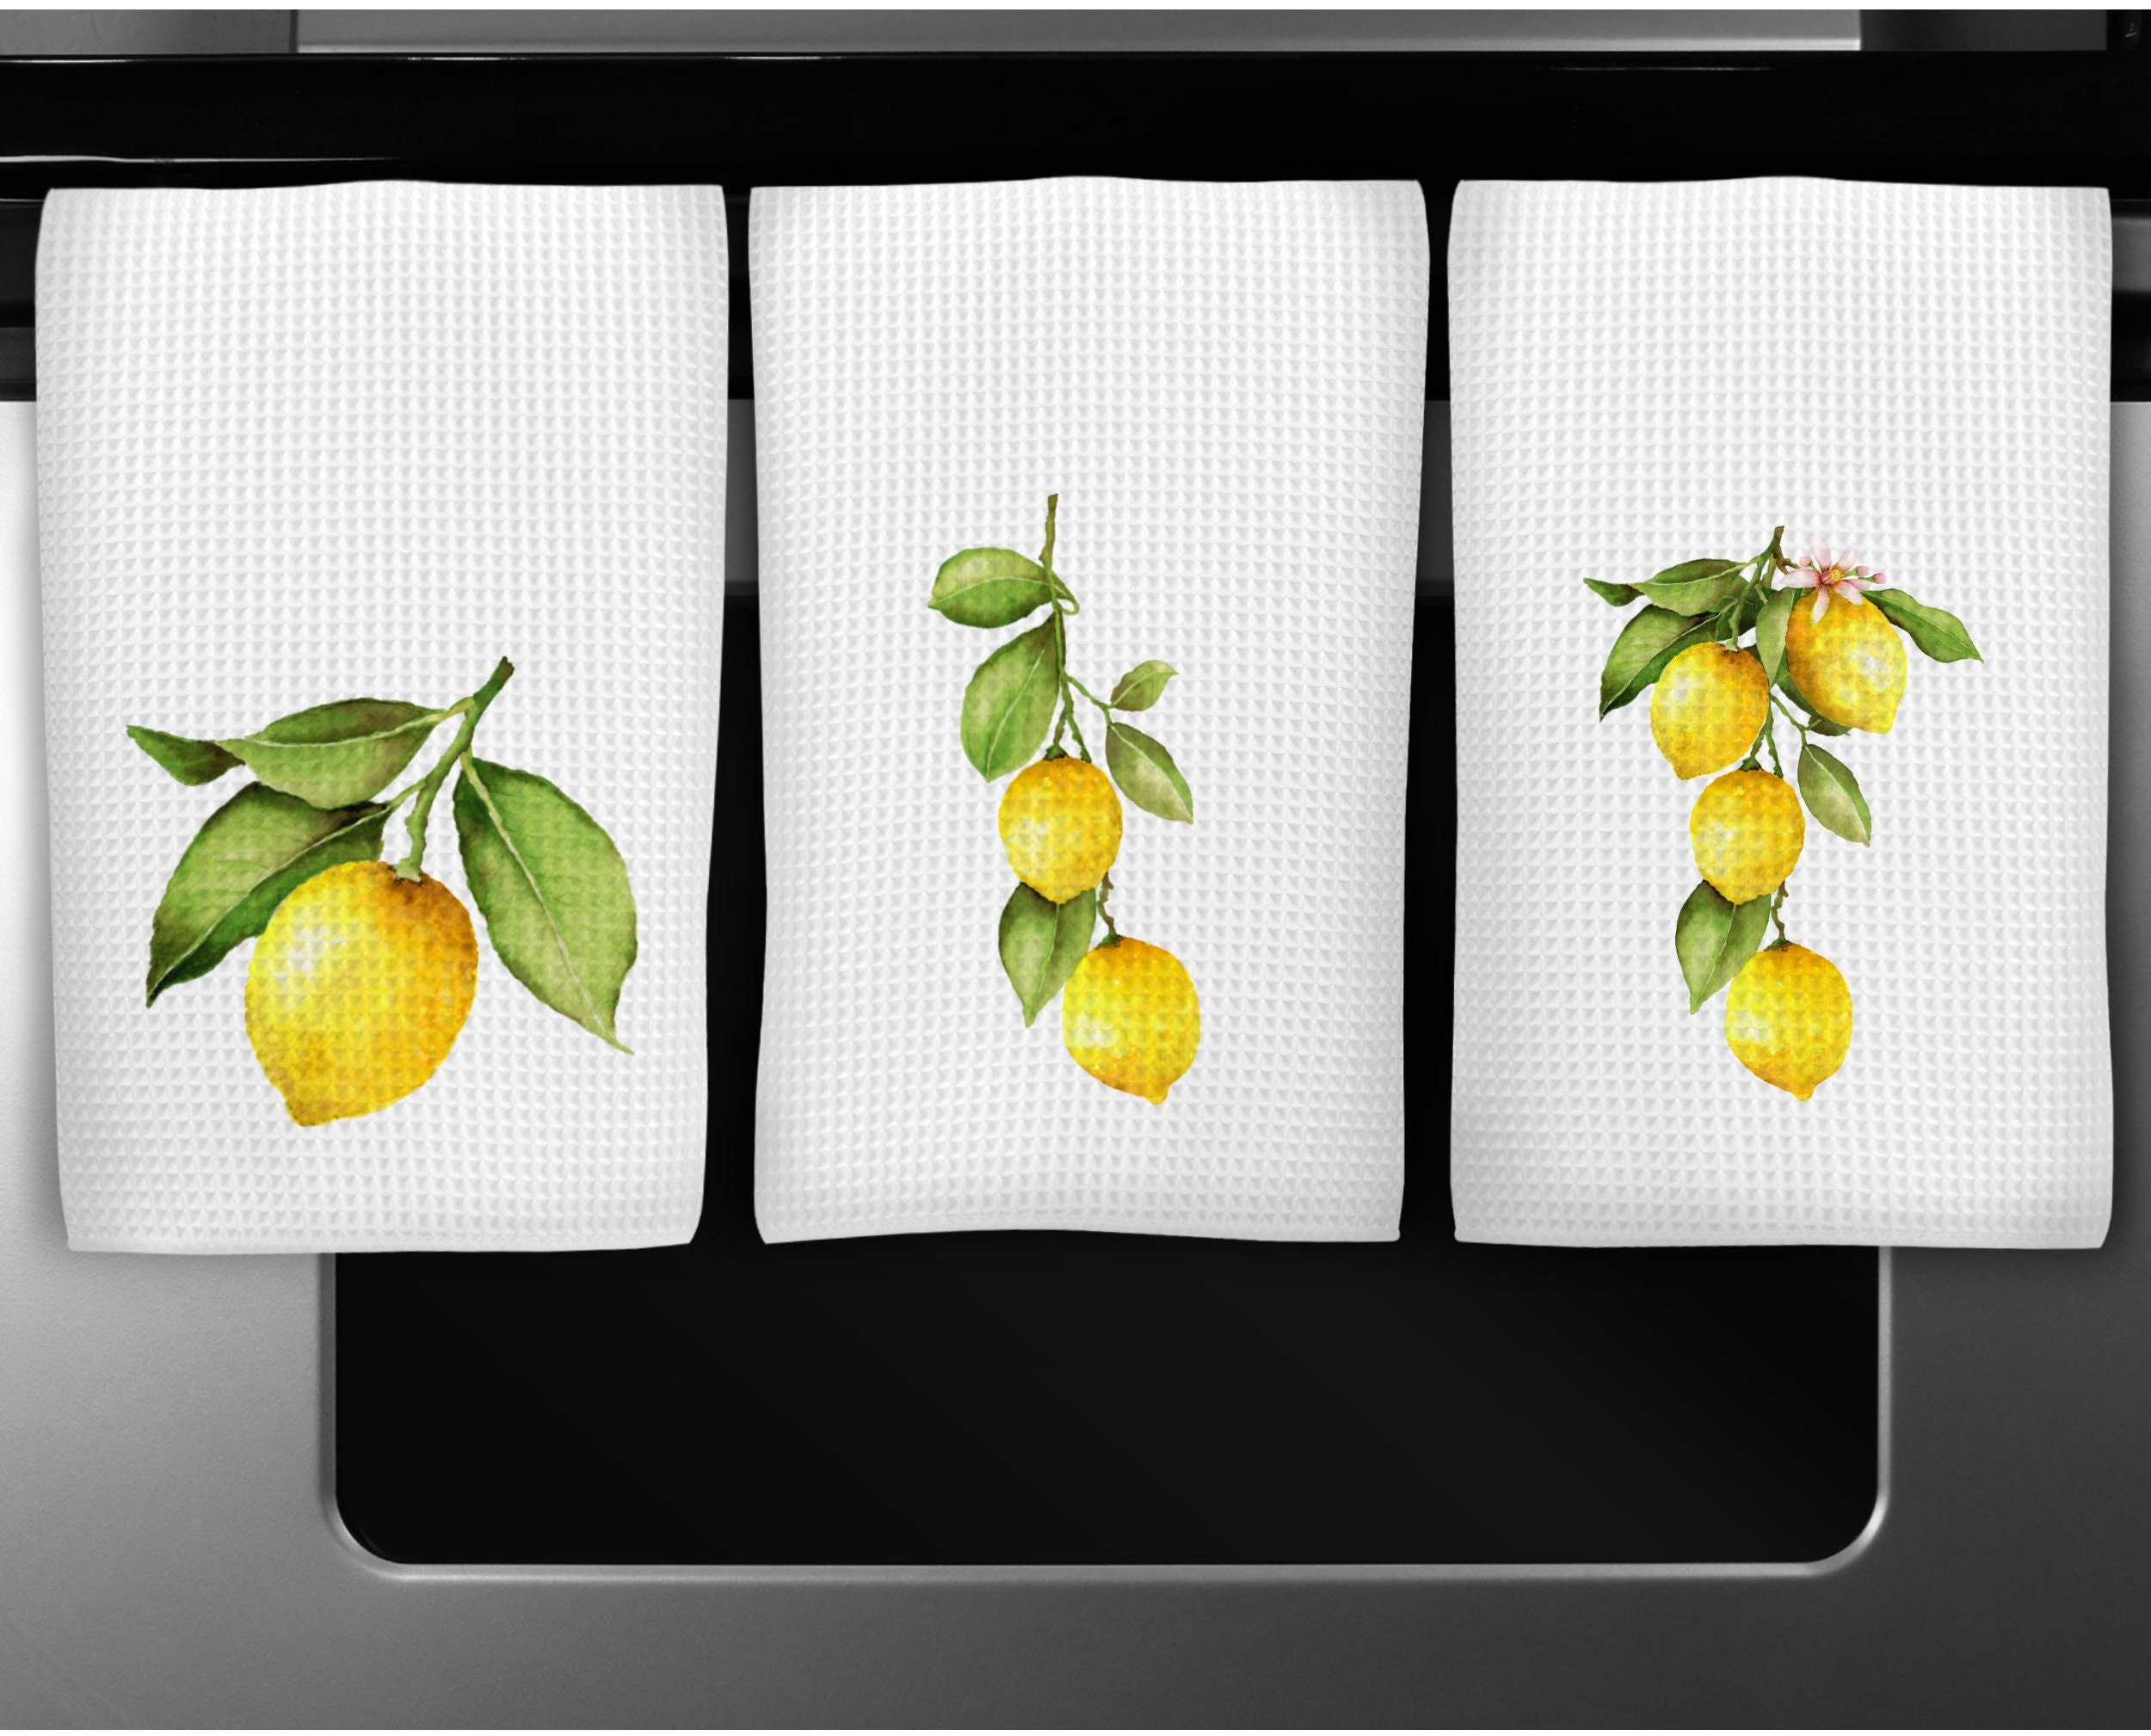  AmbeHome Kitchen Towels and Dishcloths Sets, Pack of 1 Summer  Lemon Soft Dish Rags Absorbent Dish Towels with Hanging Loop for Washing  Dishes 18x28 Inches Fruits Tiled Black Buffalo Plaid 